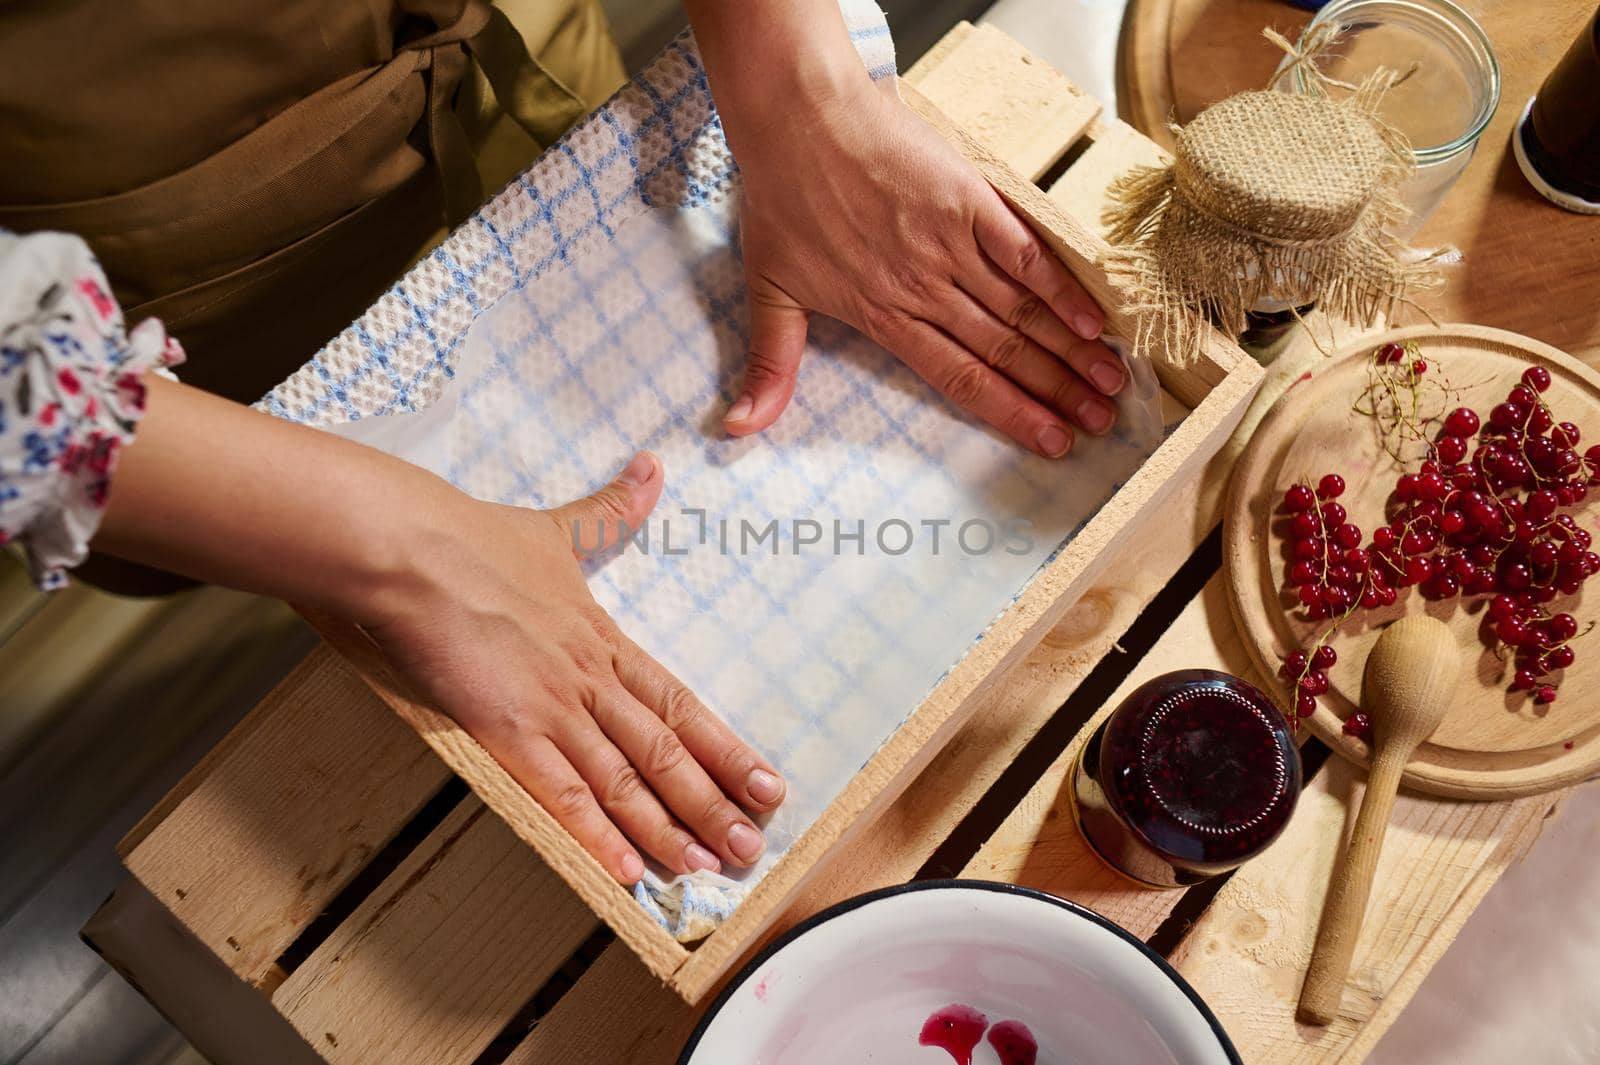 Details: Hands of a woman housewife arranging jars with handmade jam upside down in a wooden crate and covering them with a waffle towel. Red currant berries lying down on wooden board